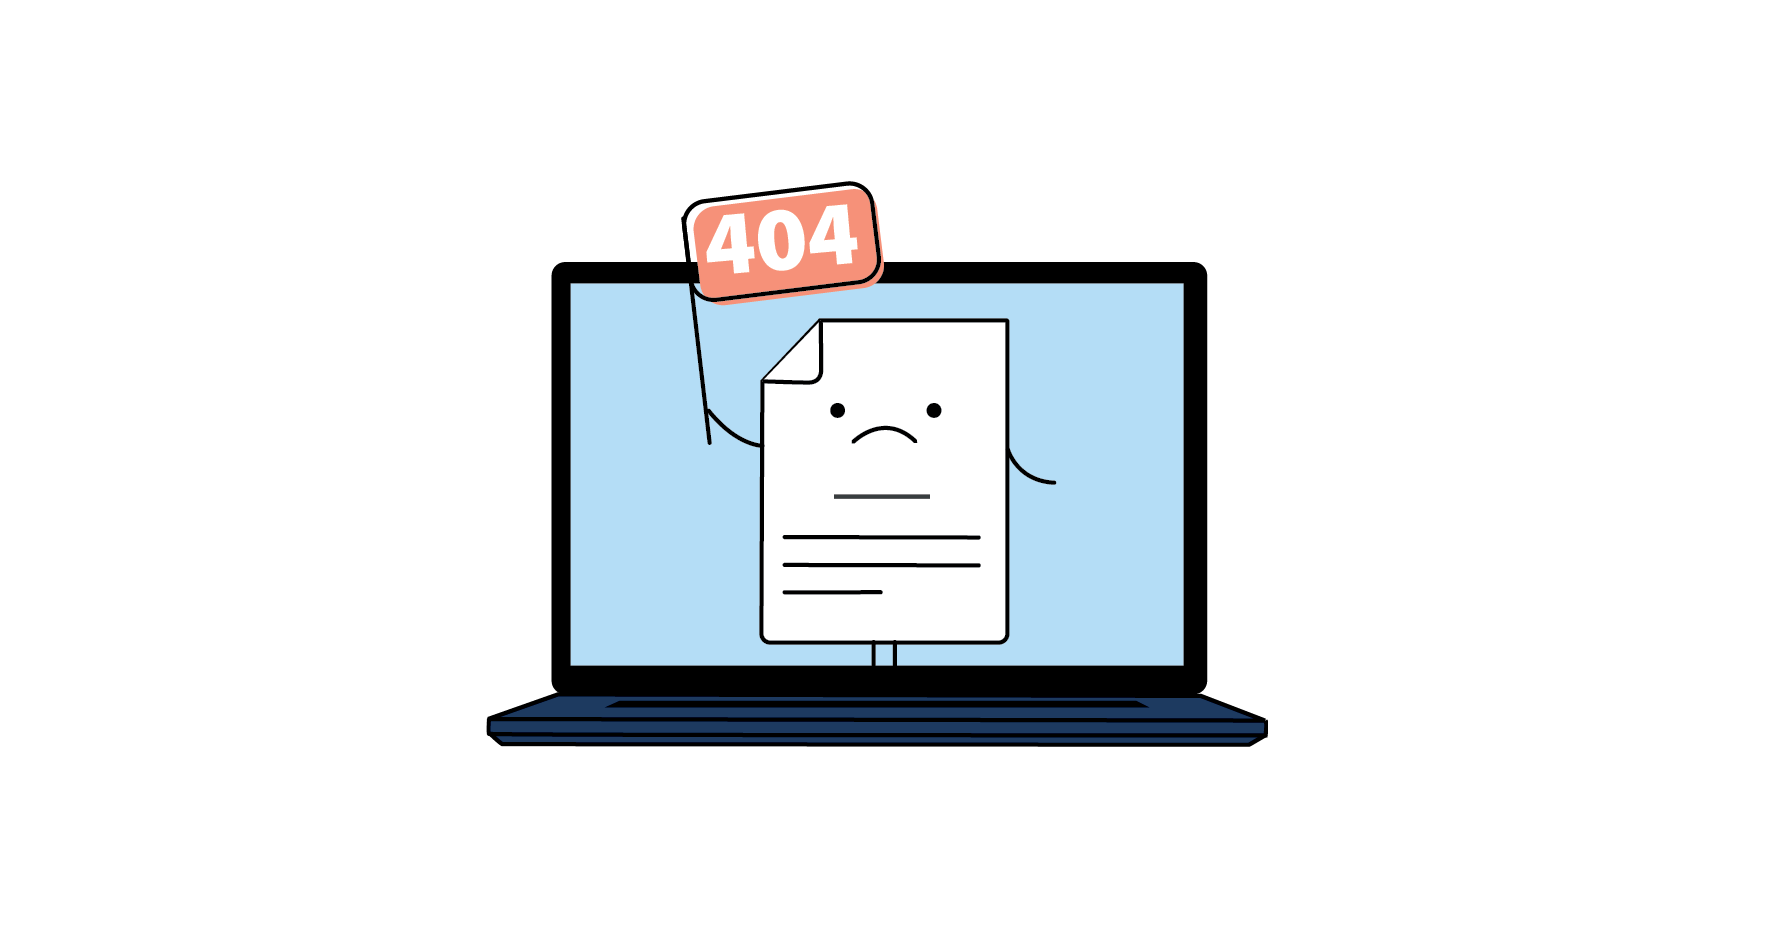 "404 message on laptop graphic"